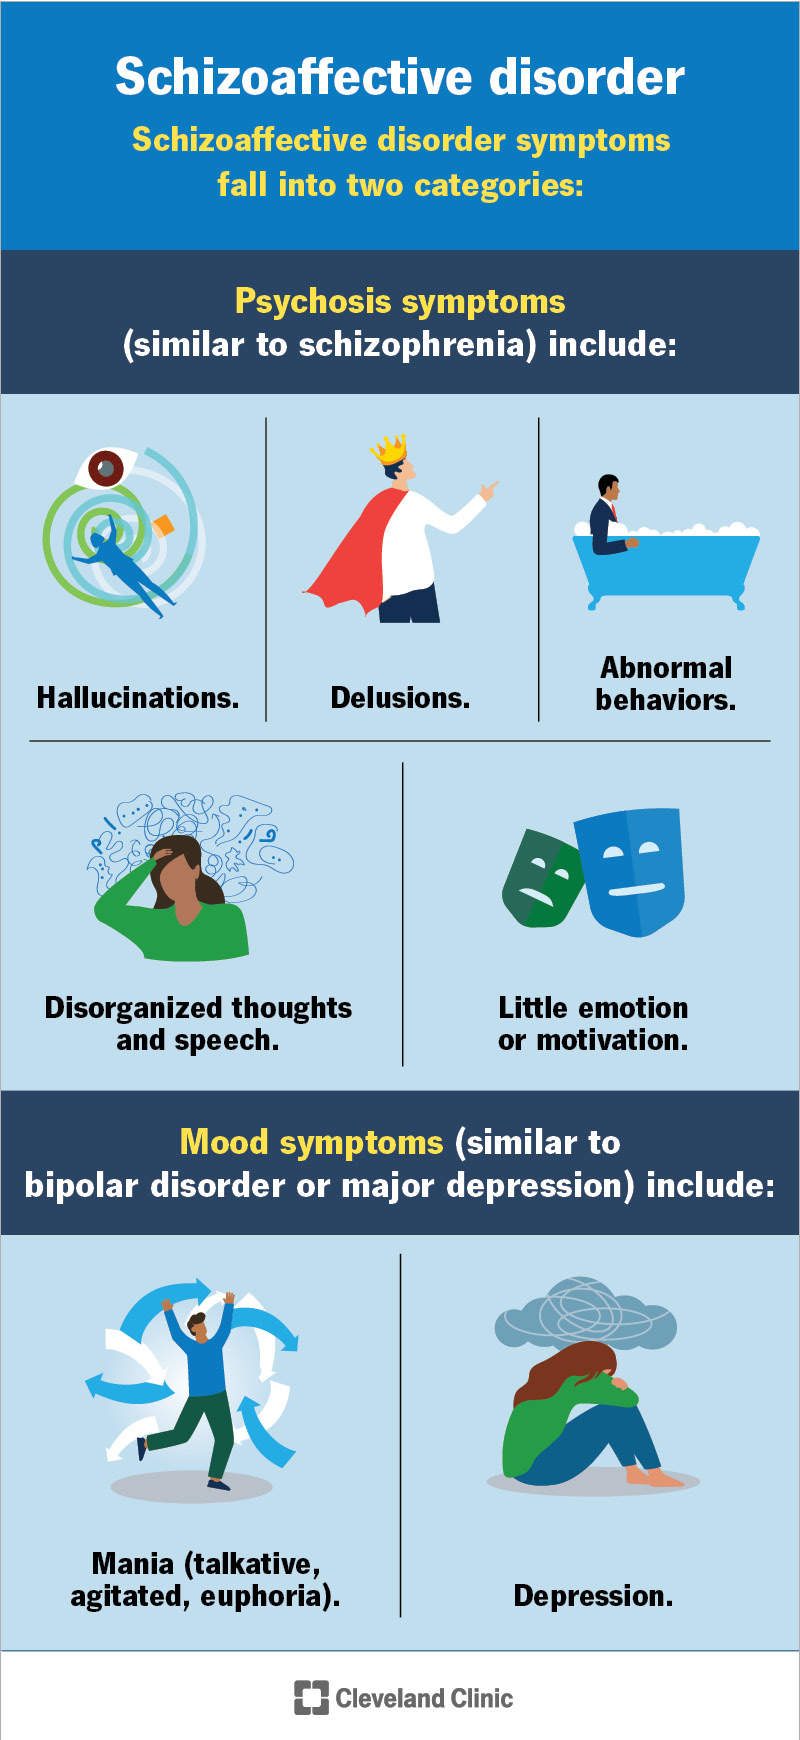 Psychosis and mood symptoms are two categories of schizoaffective disorder symptoms.